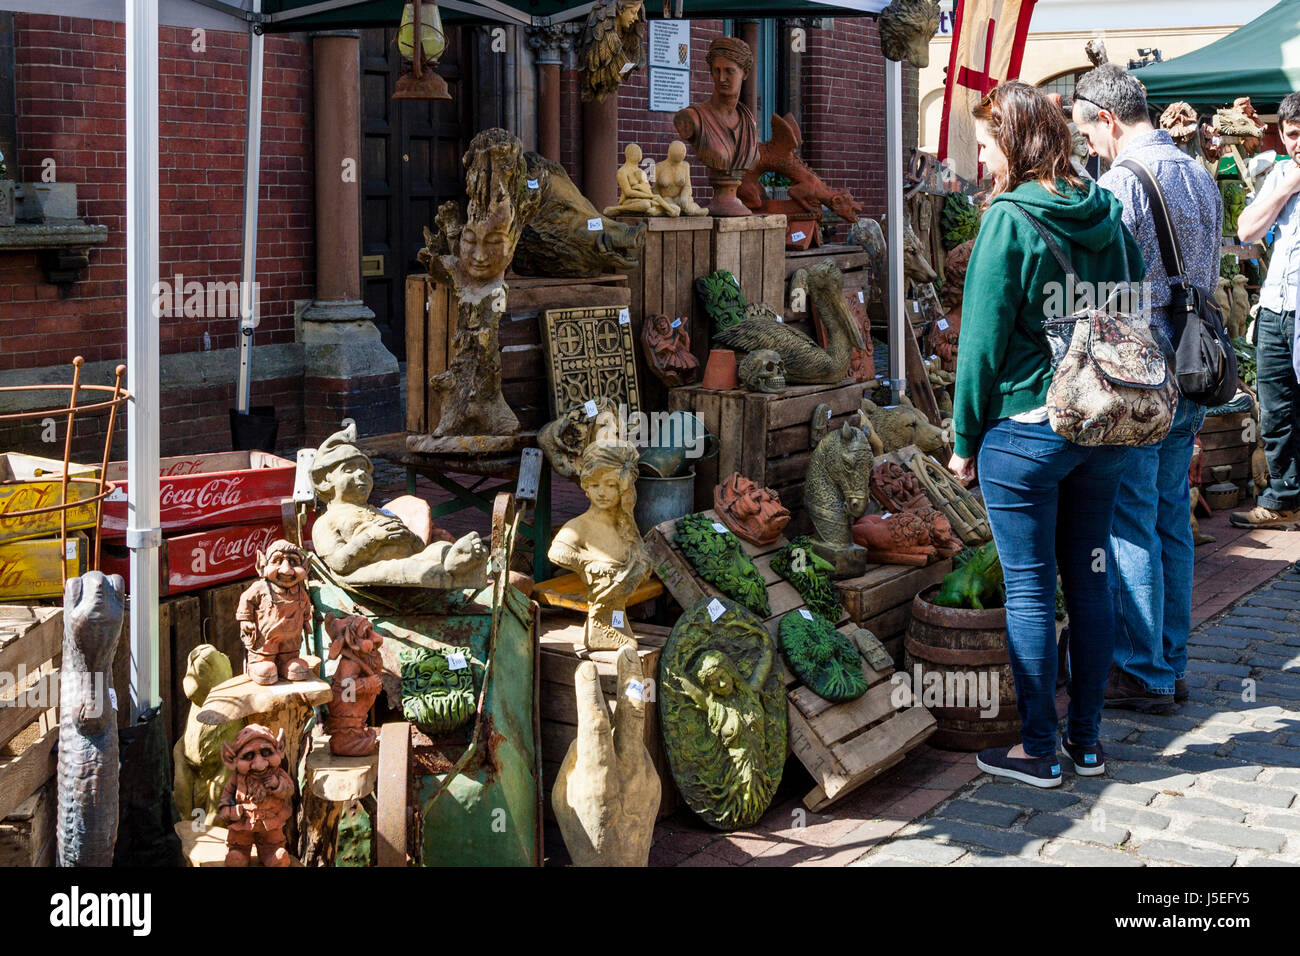 A Couple Looking At Garden Ornaments, Street Market, Lewes, East Sussex, UK Stock Photo